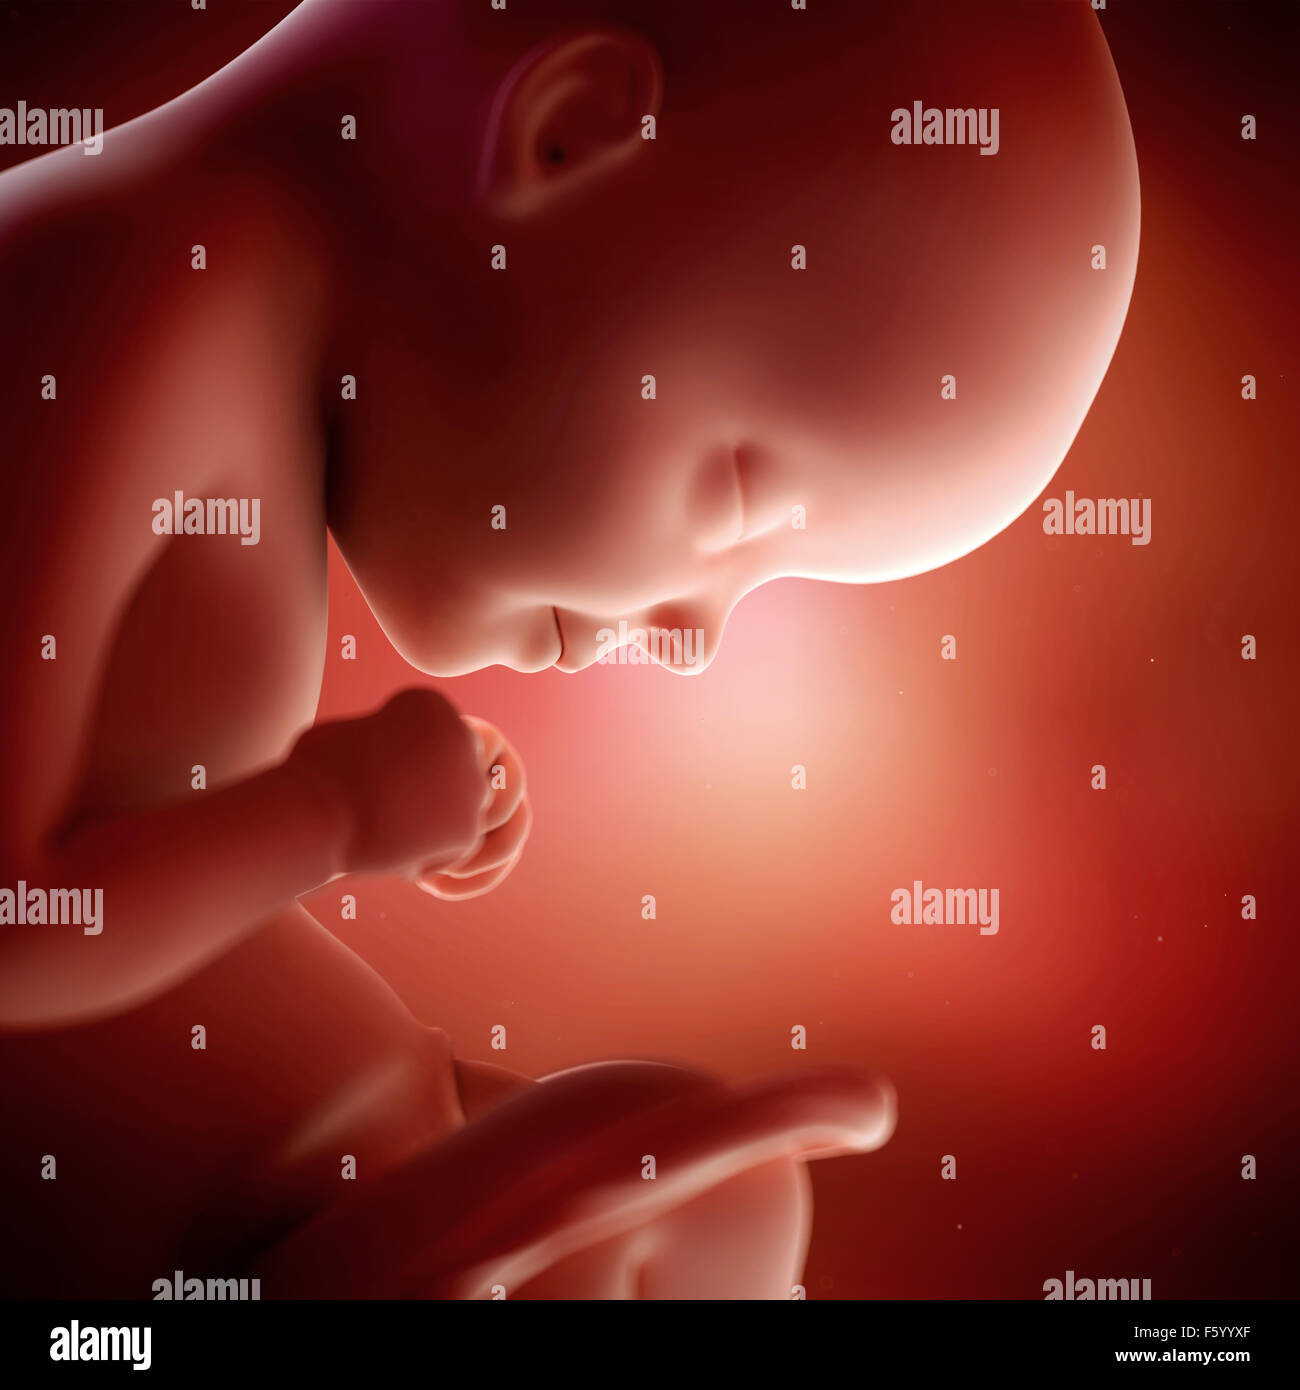 medical accurate 3d illustration of a fetus week 29 Stock Photo